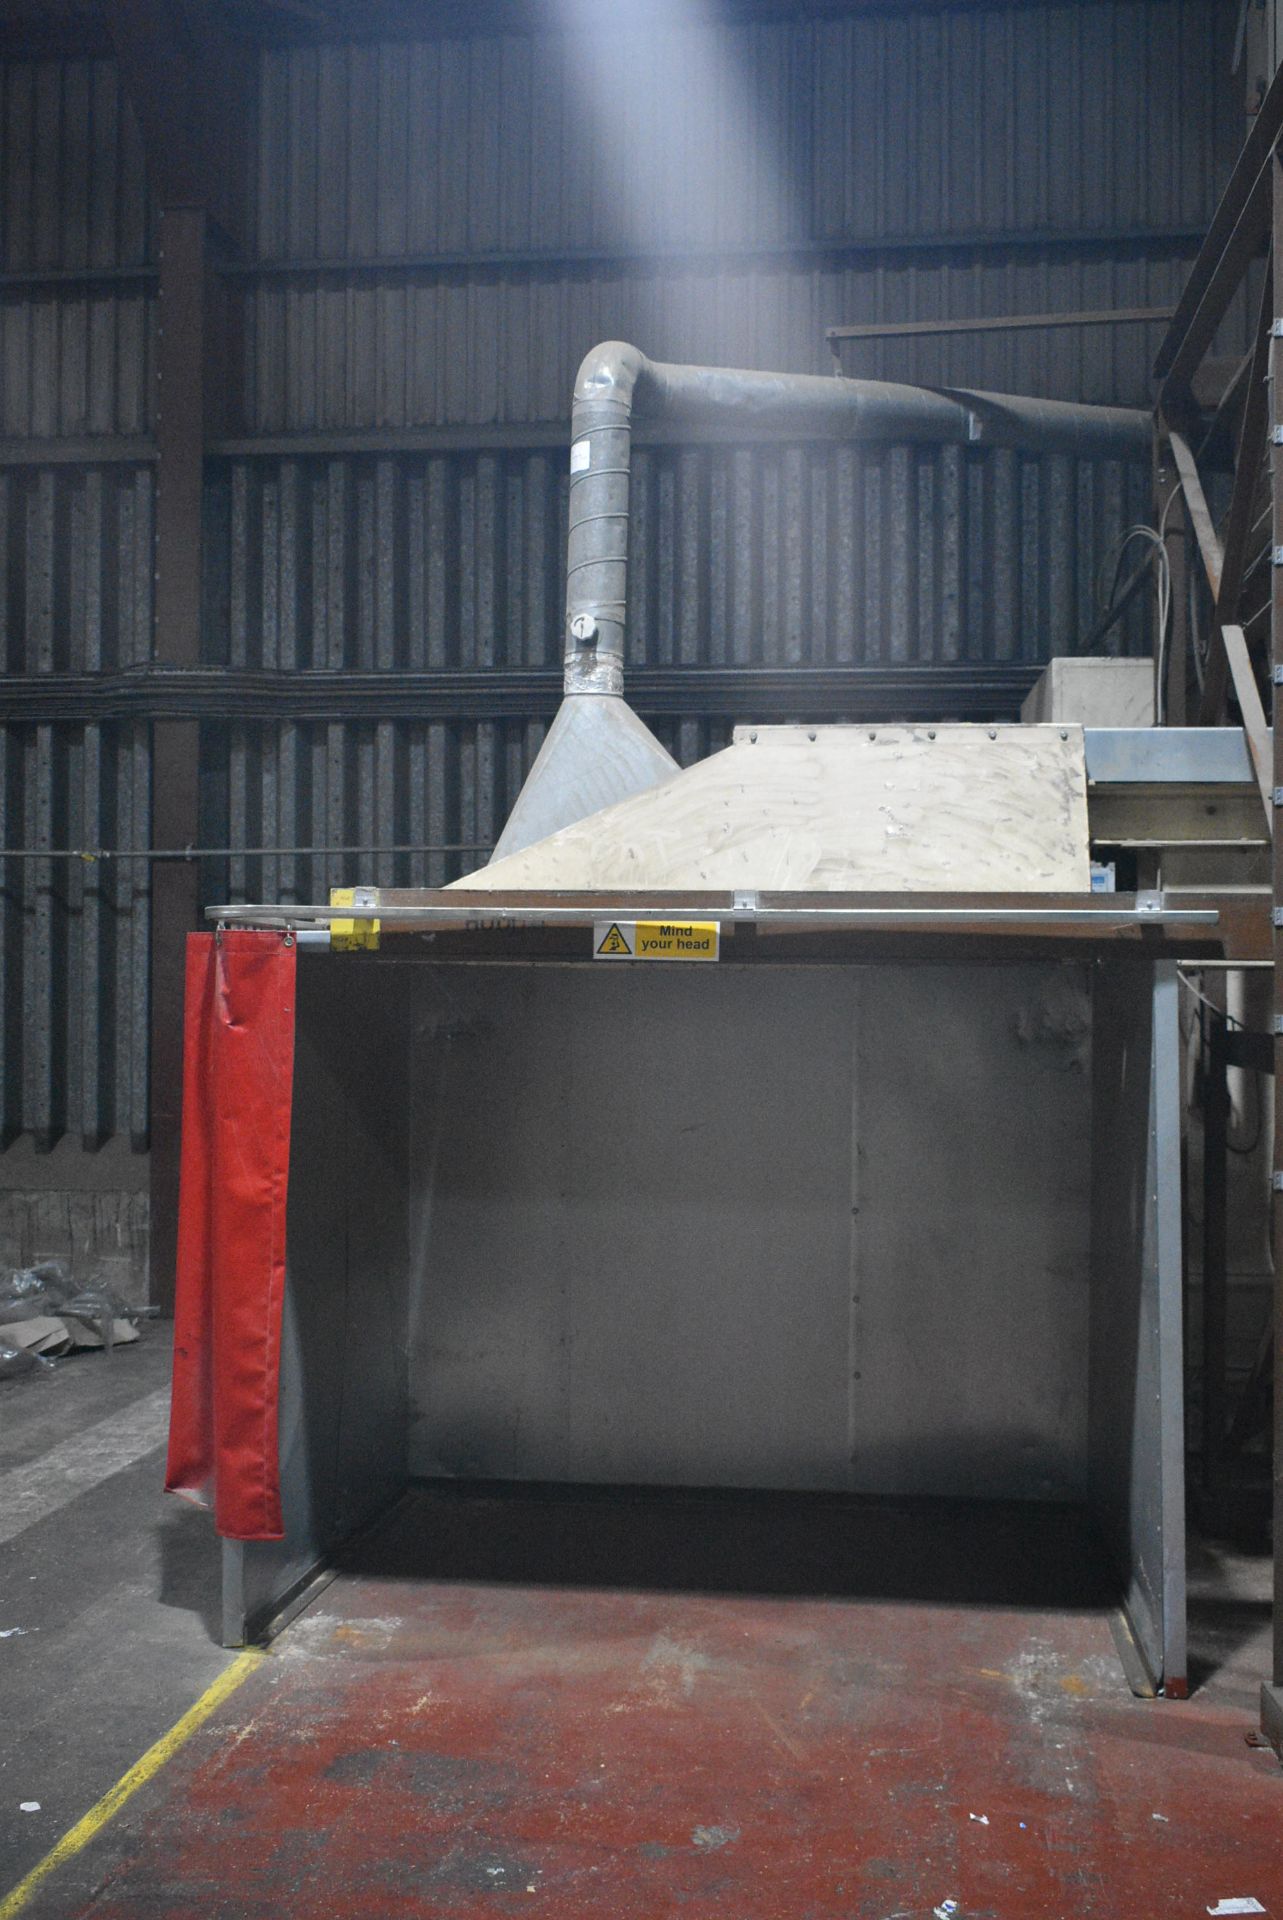 1500kg capacity LOSS IN WEIGHT WEIGHER, approx. 8.5m x 2.2m x 6.8m total footprint, with bin tippler - Image 4 of 7